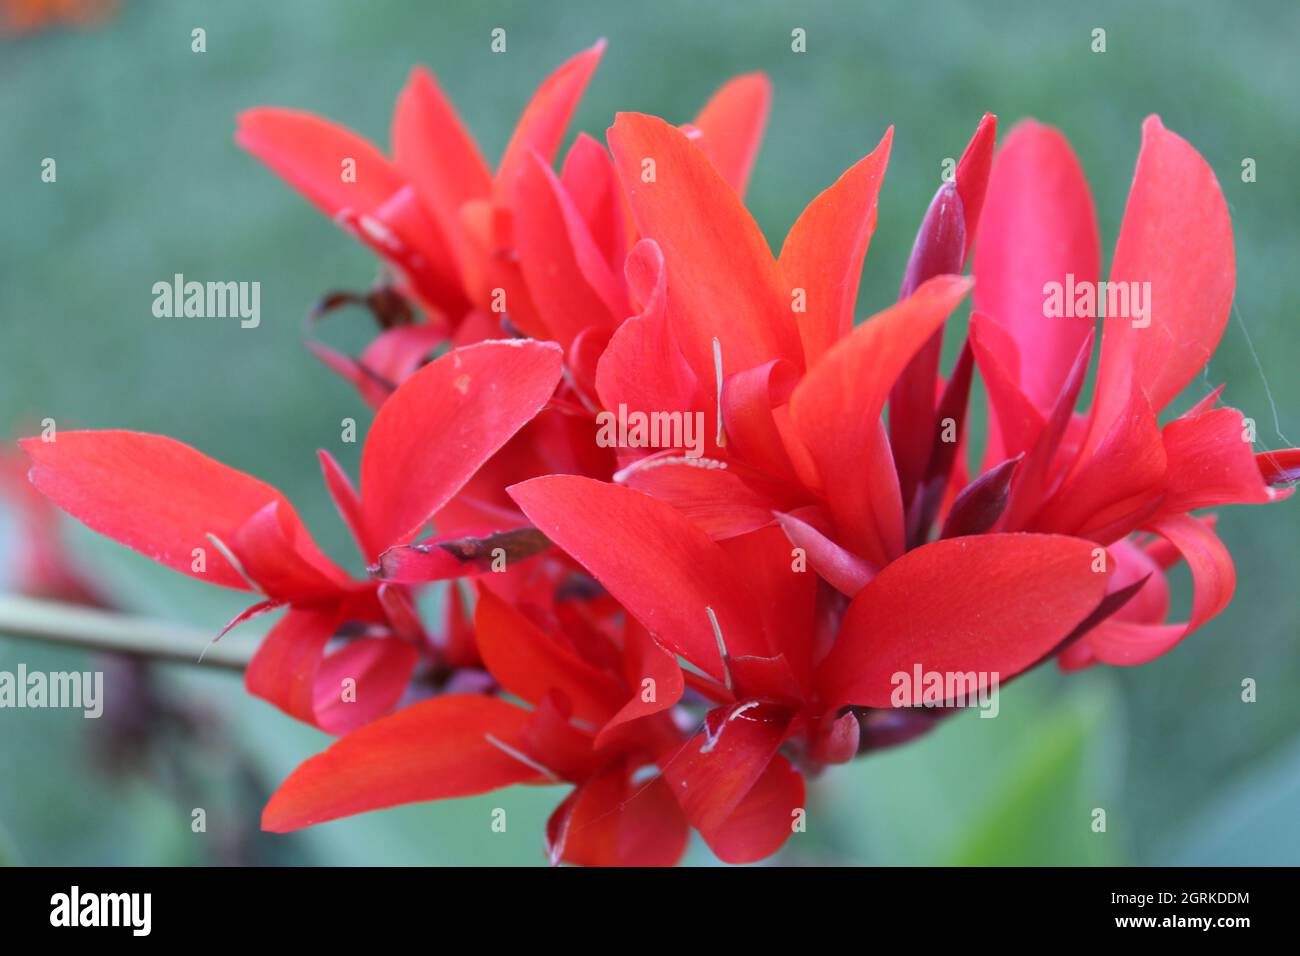 Blooming red cannas lily flower. Stock Photo